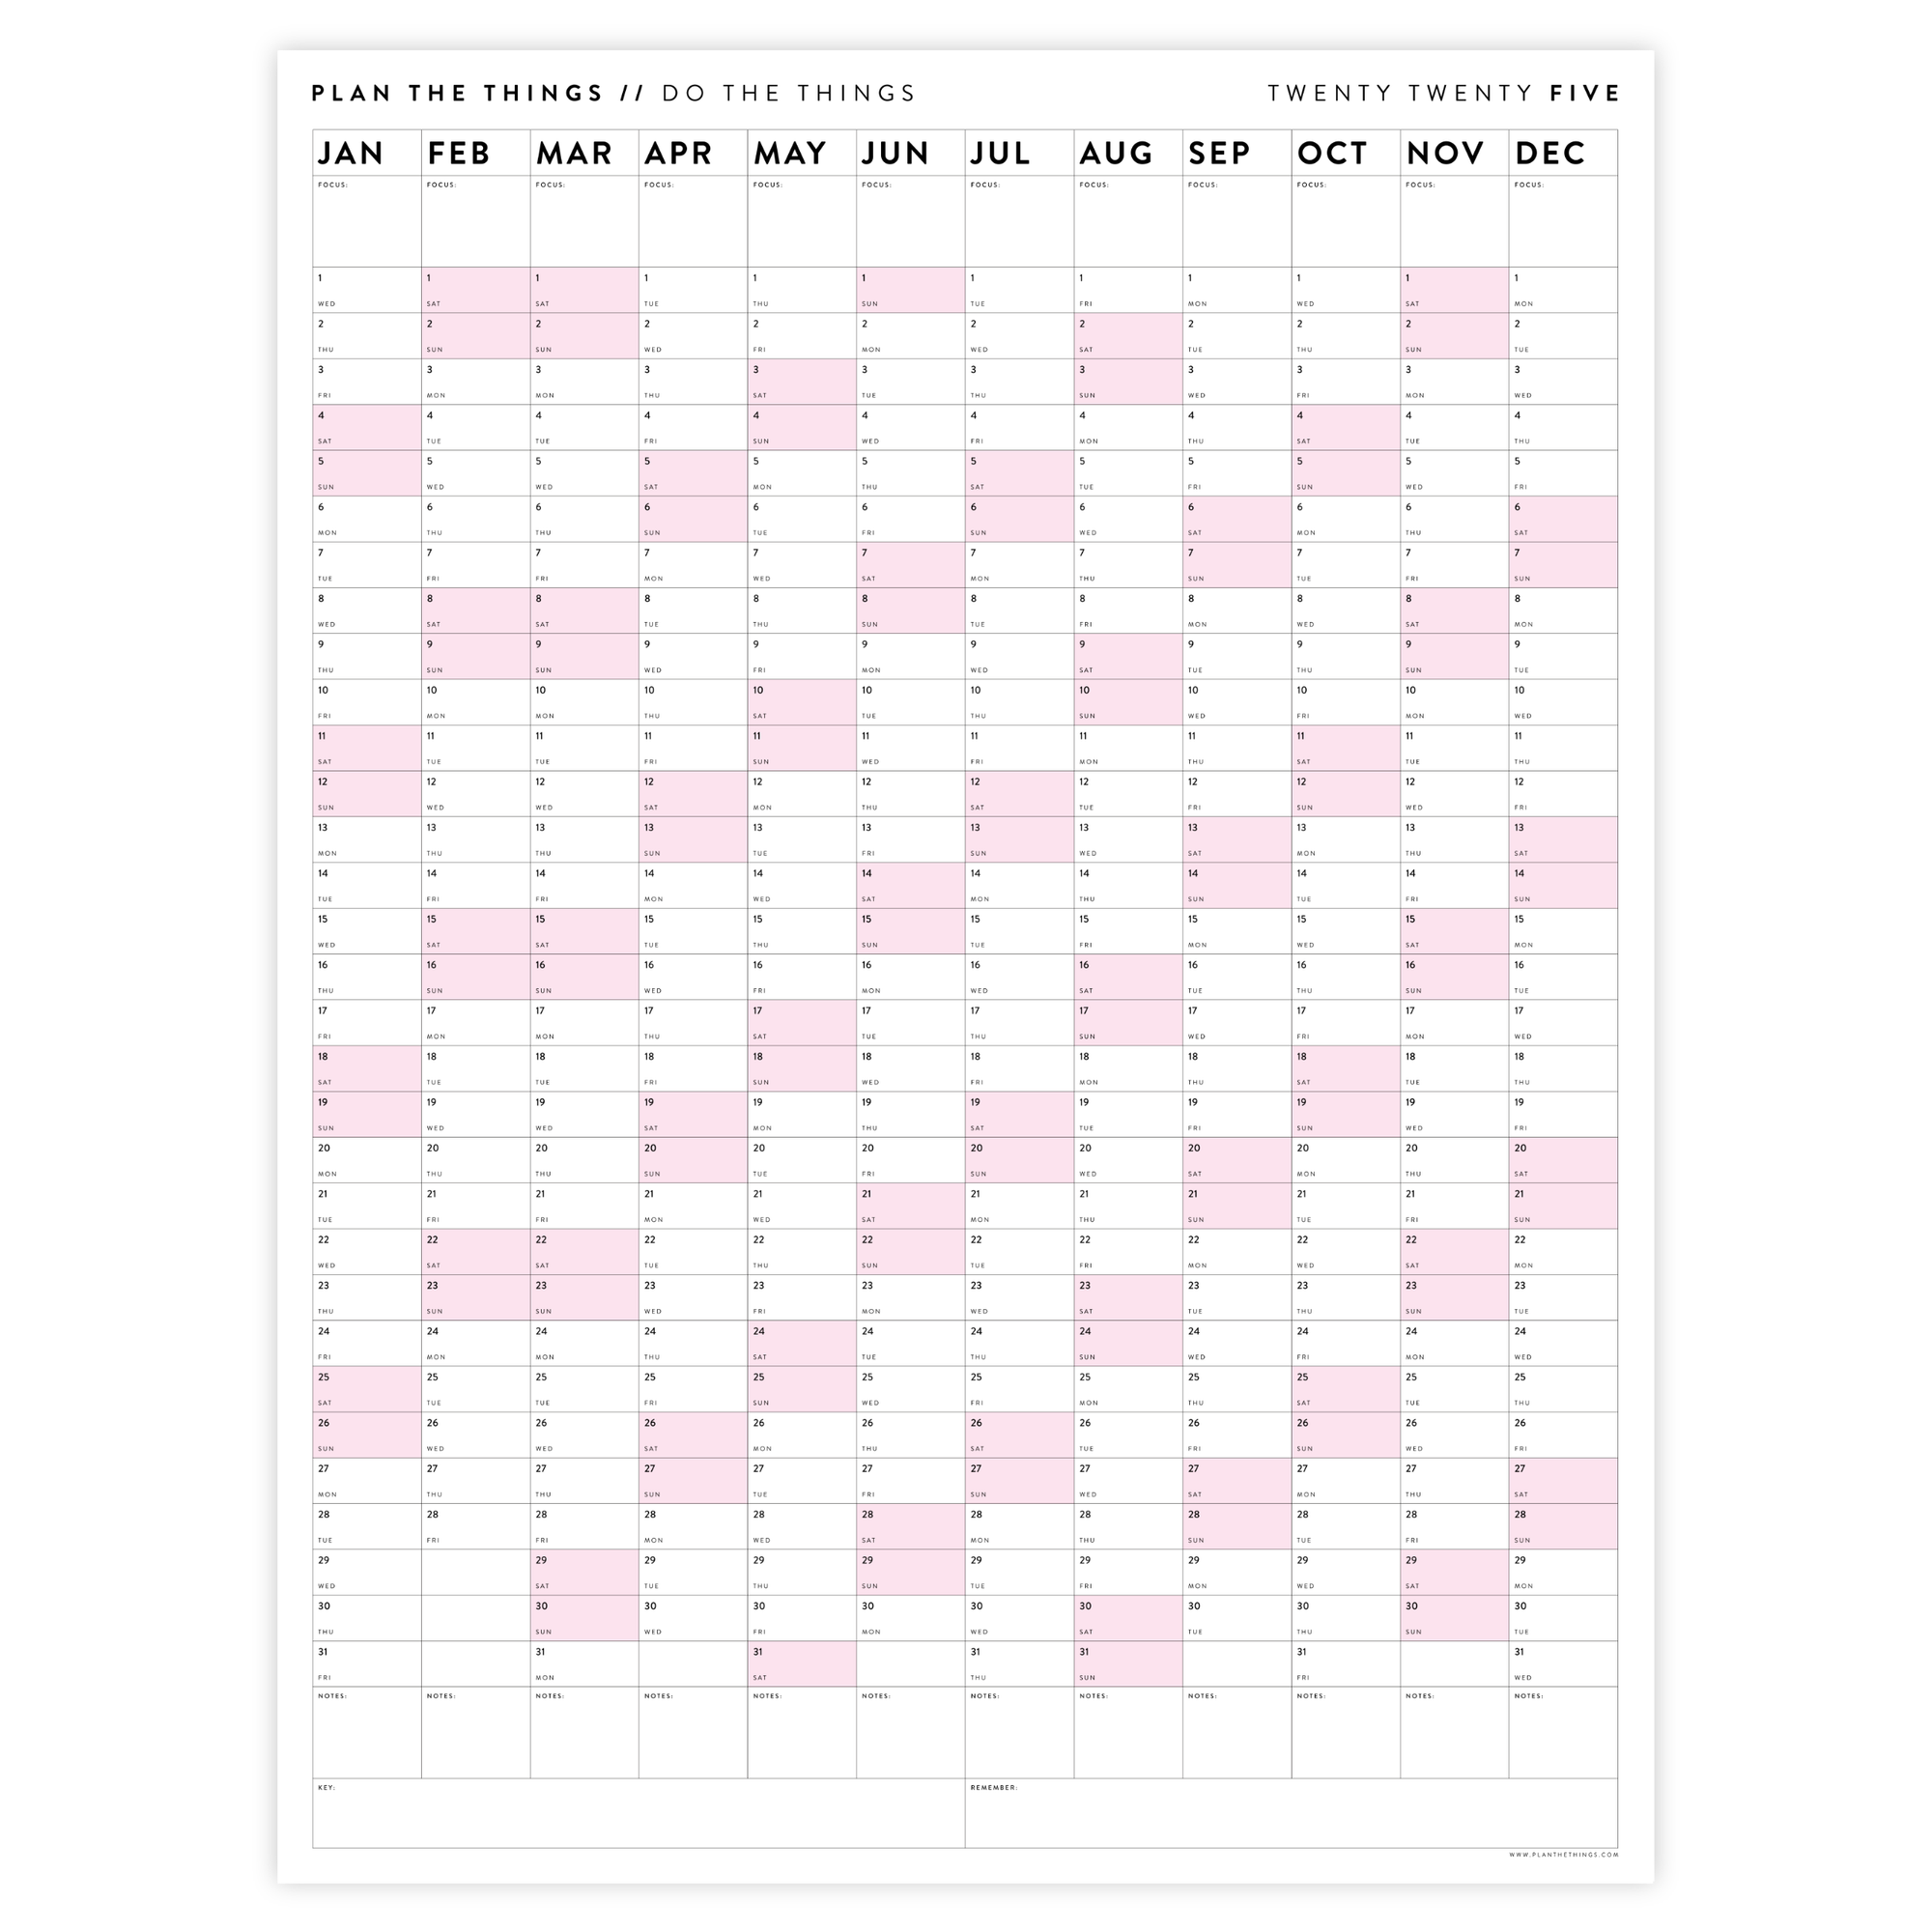 GIANT 2025 ANNUAL WALL CALENDAR | VERTICAL WITH PINK WEEKENDS